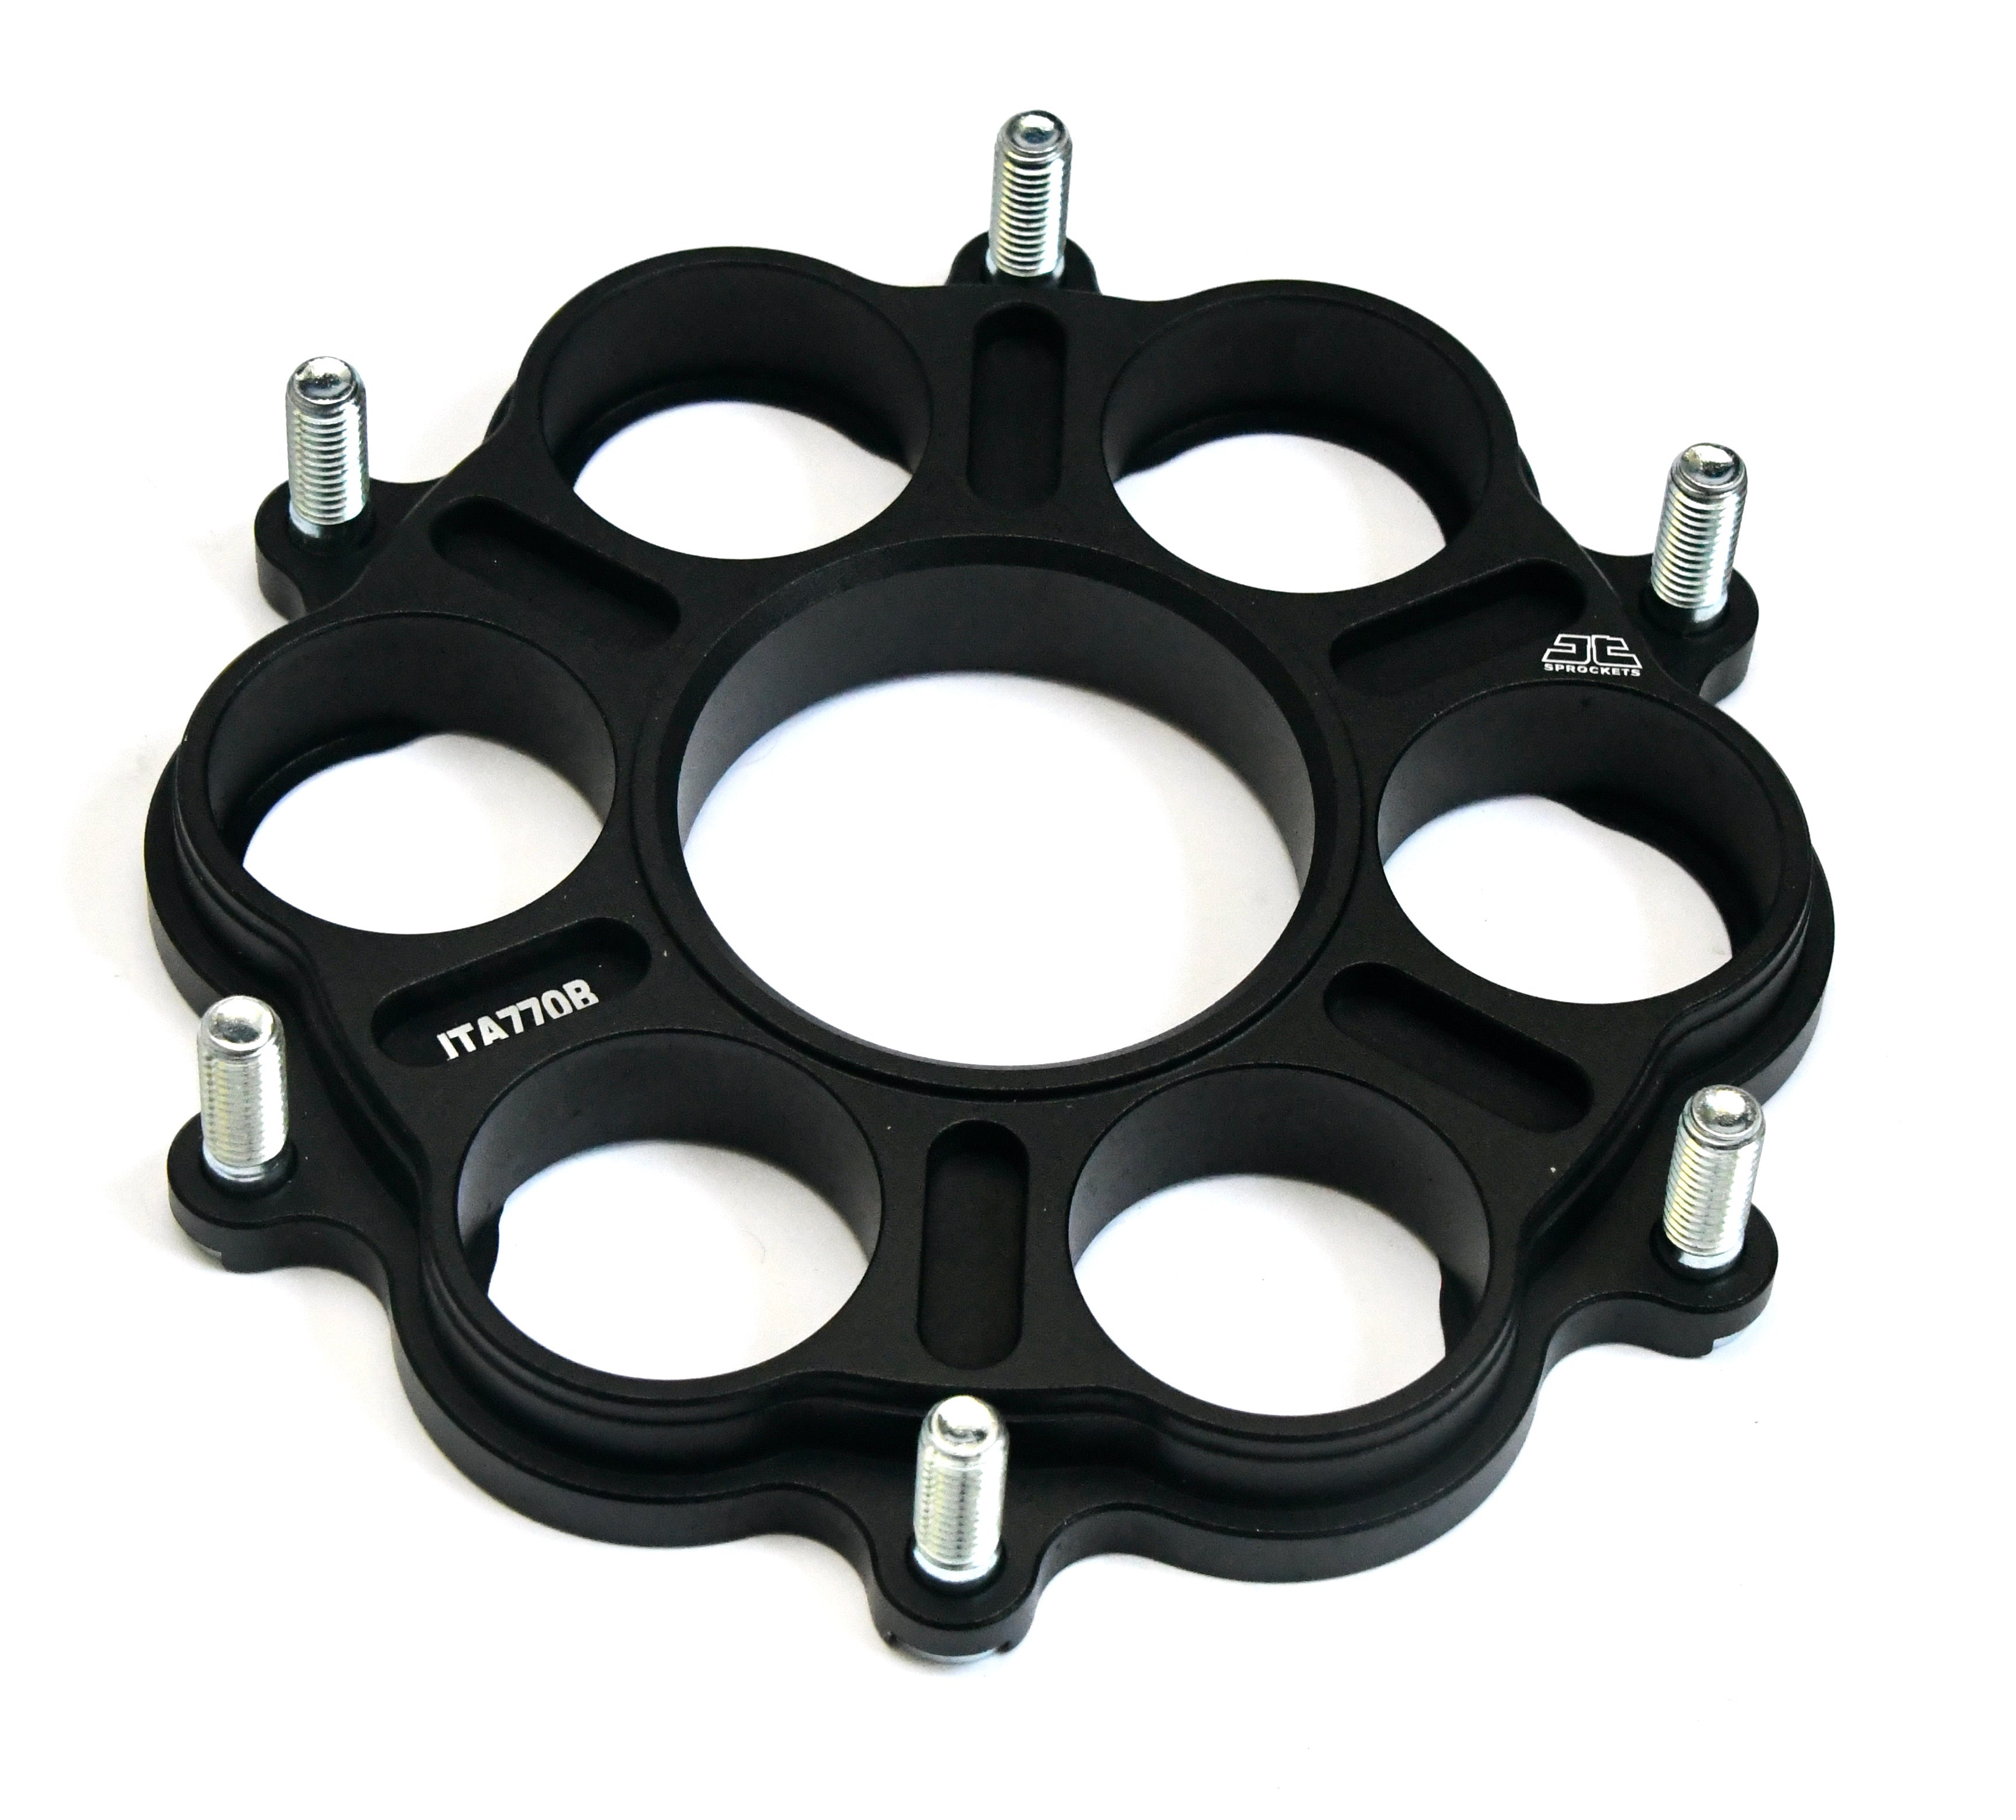 Add the an Aluminium Quick Release Sprocket Carrier Save £5 - When bought with a matching sprocket - 0